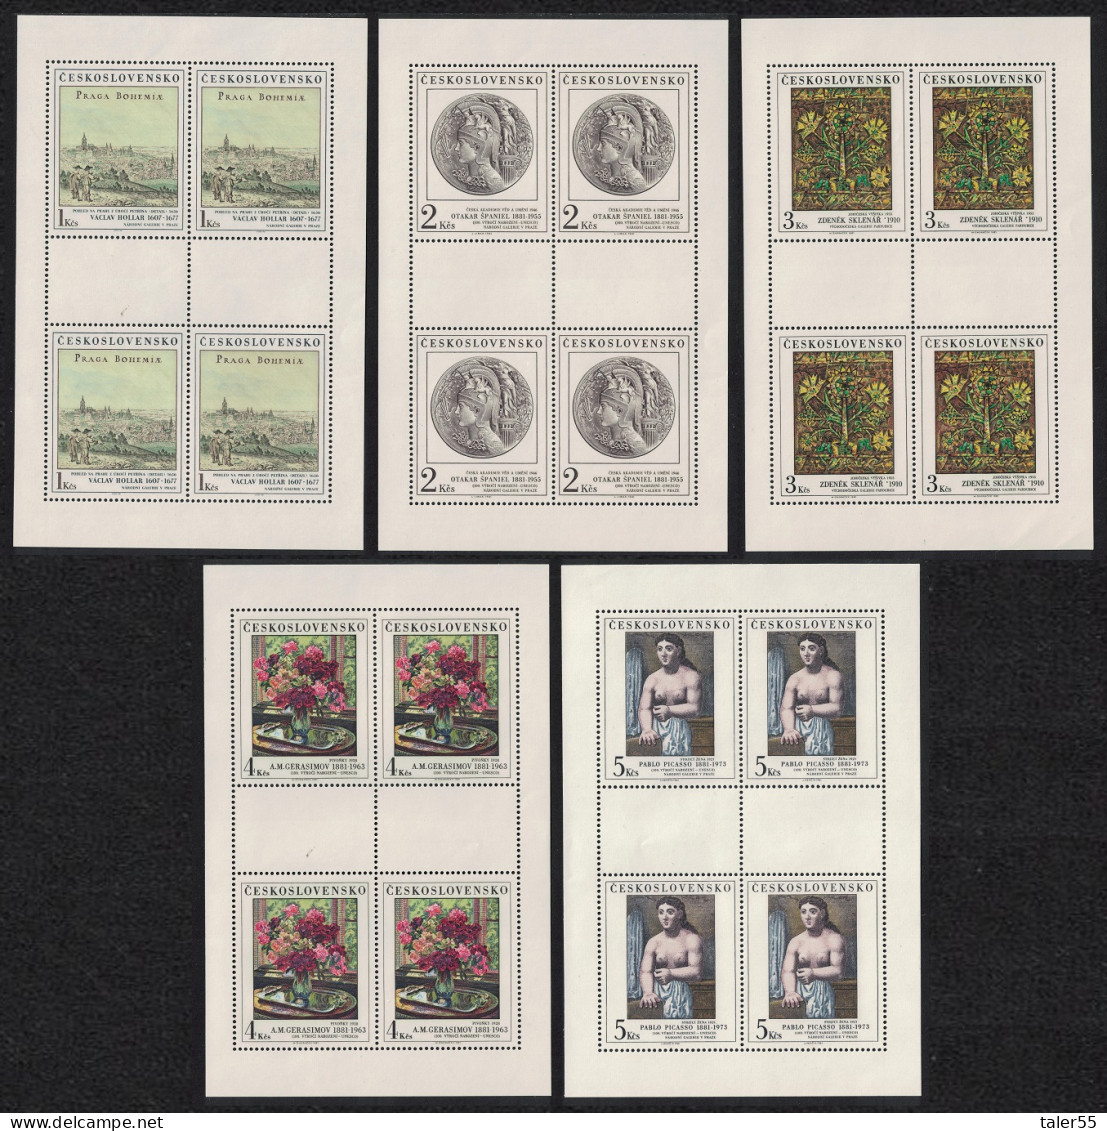 Czechoslovakia Art Paintings 15th Series 5 Sheetlets 1981 MNH SG#2601-2605 - Unused Stamps